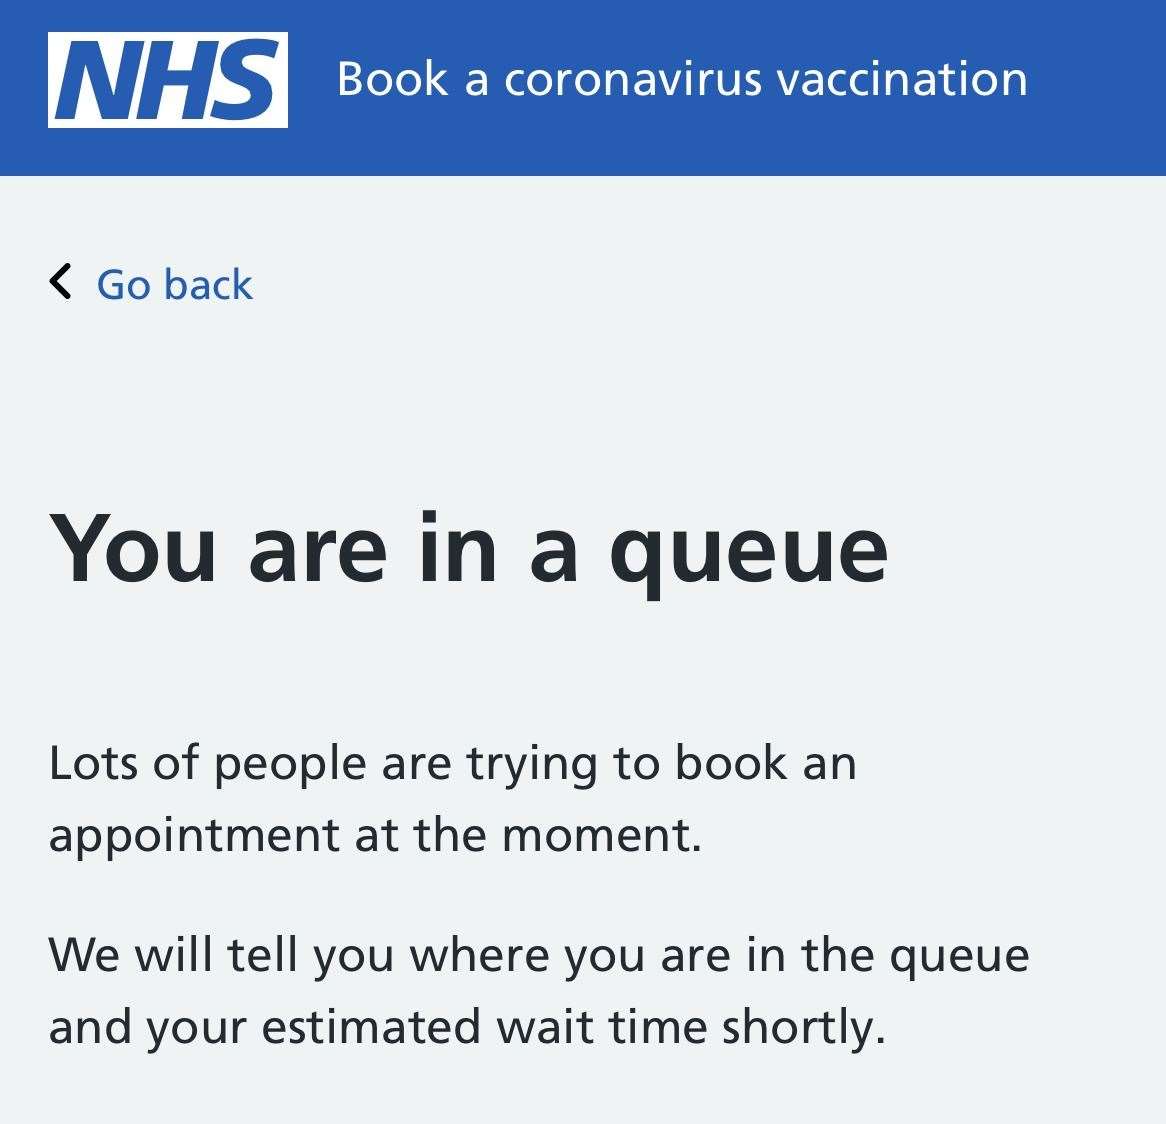 There are long queues on the website as people try and book an appointment